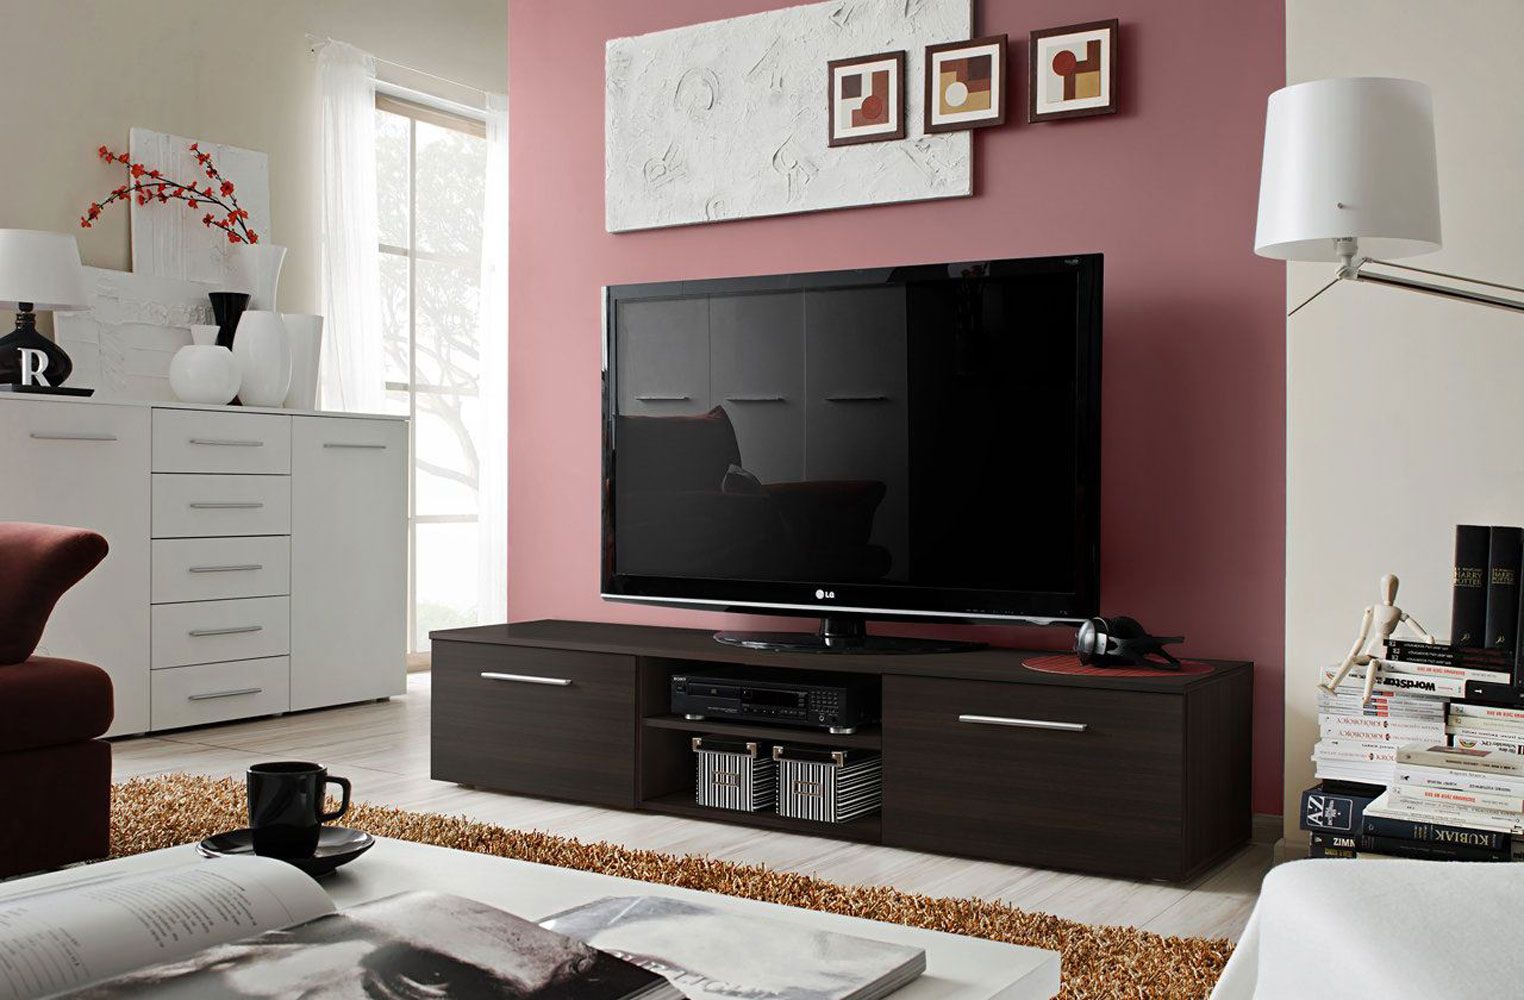 Simple TV cabinet Salmeli 21, color: black - Dimensions: 35 x 180 x 45 cm (H x W x D), with two doors